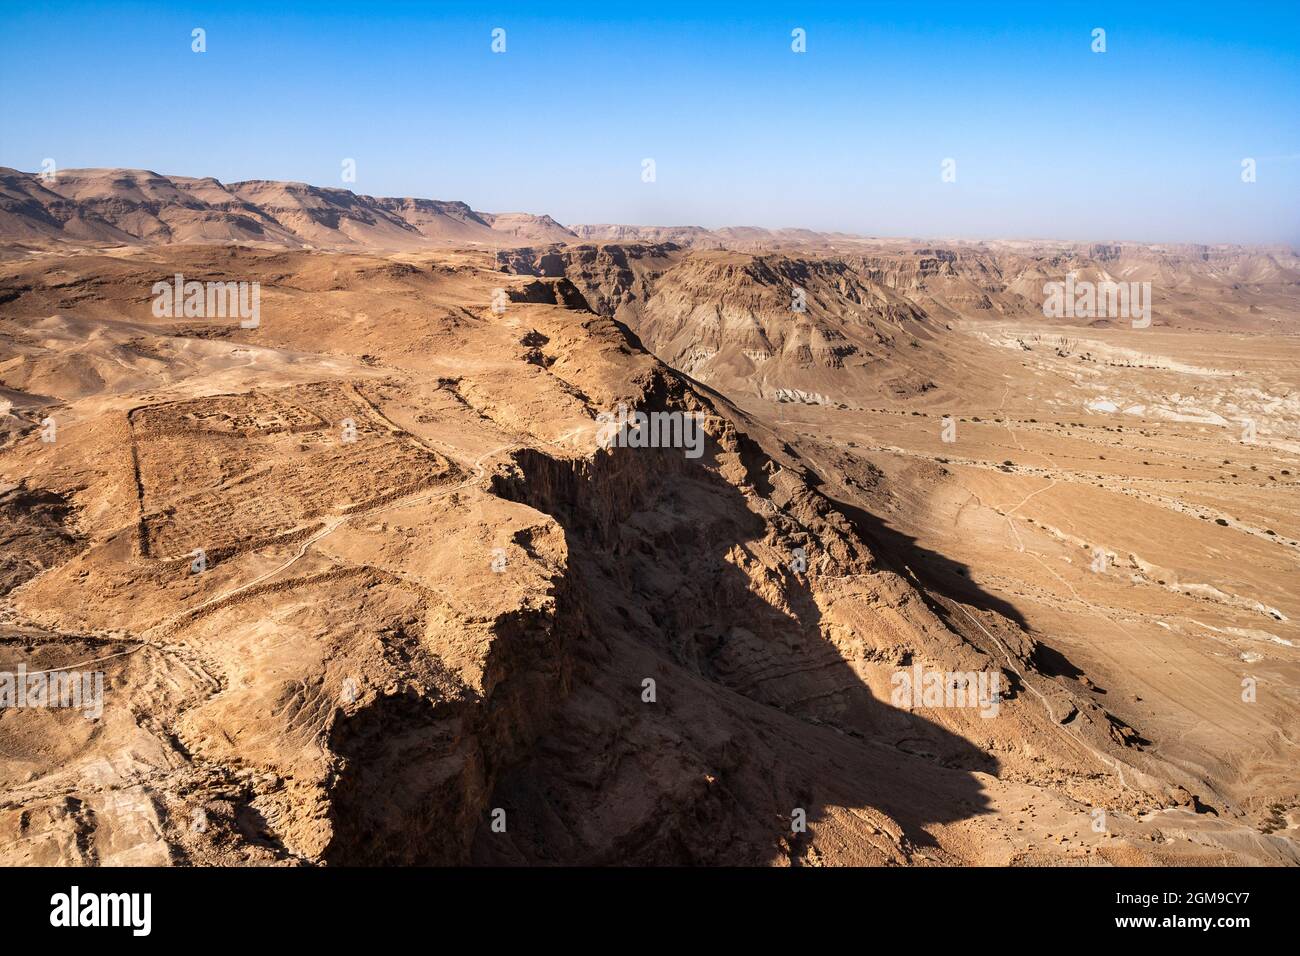 Ruins of the Roman Camp from the Siege of Masada viewed from Masada in the Negev desert, Israel Stock Photo